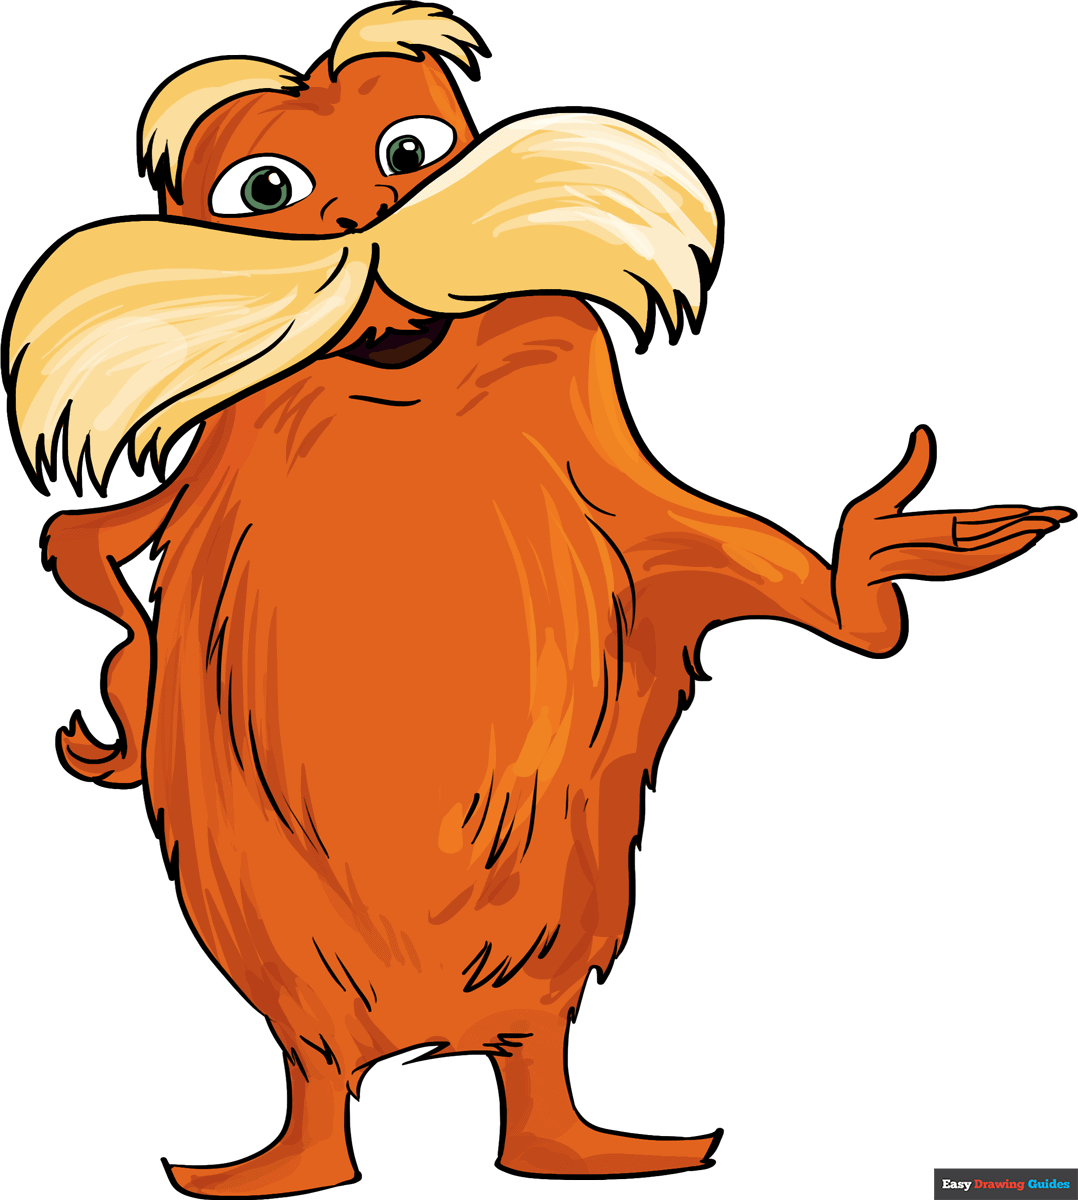 How to draw the lorax by dr seuss